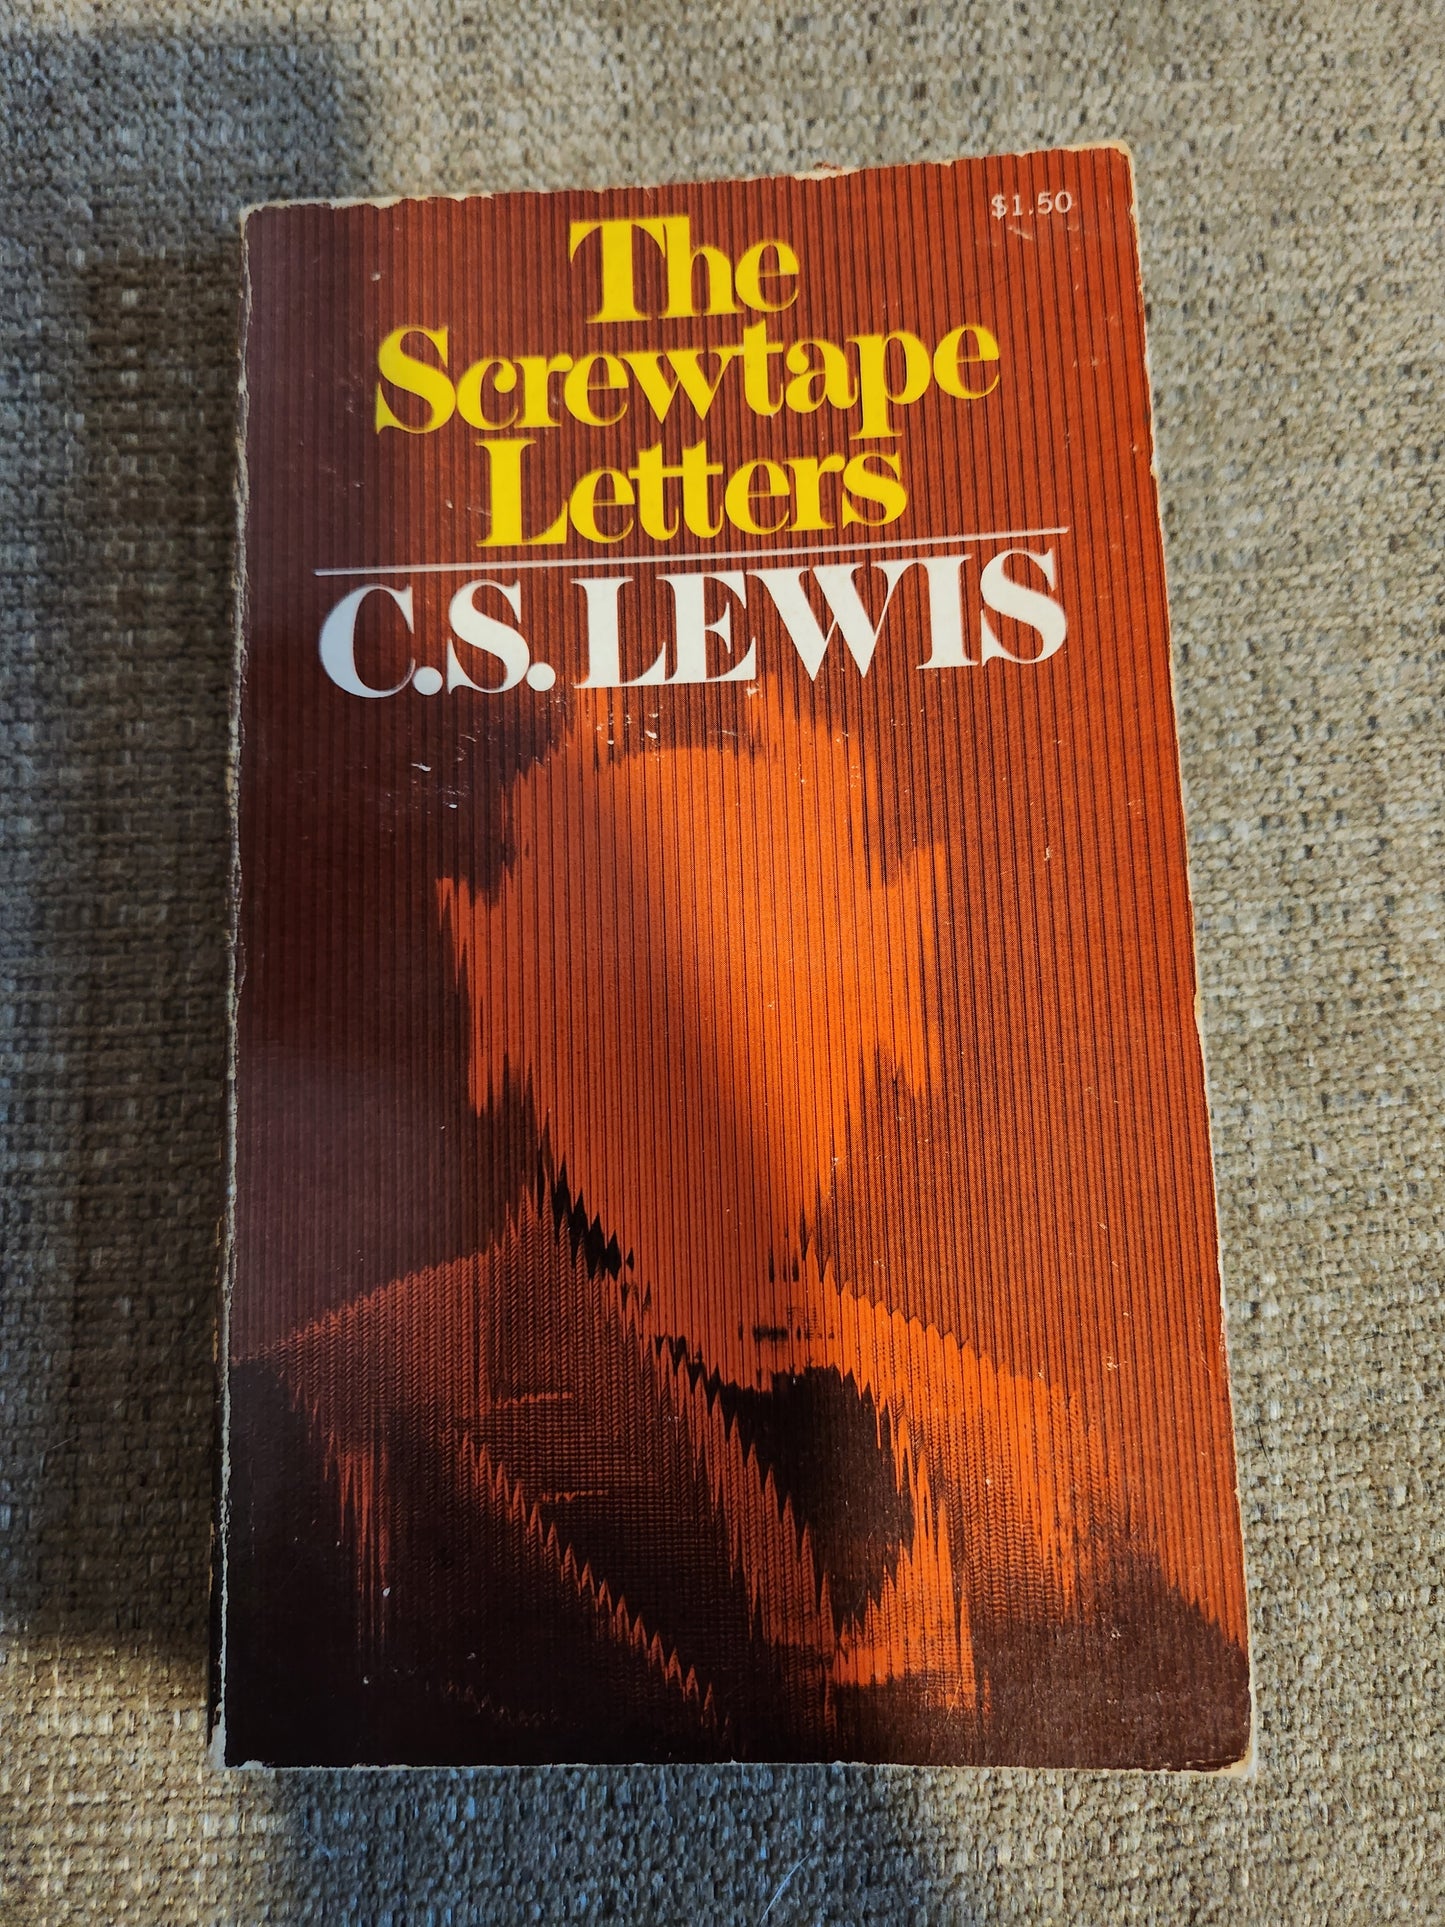 "The Screwtape Letters" by C. S. Lewis